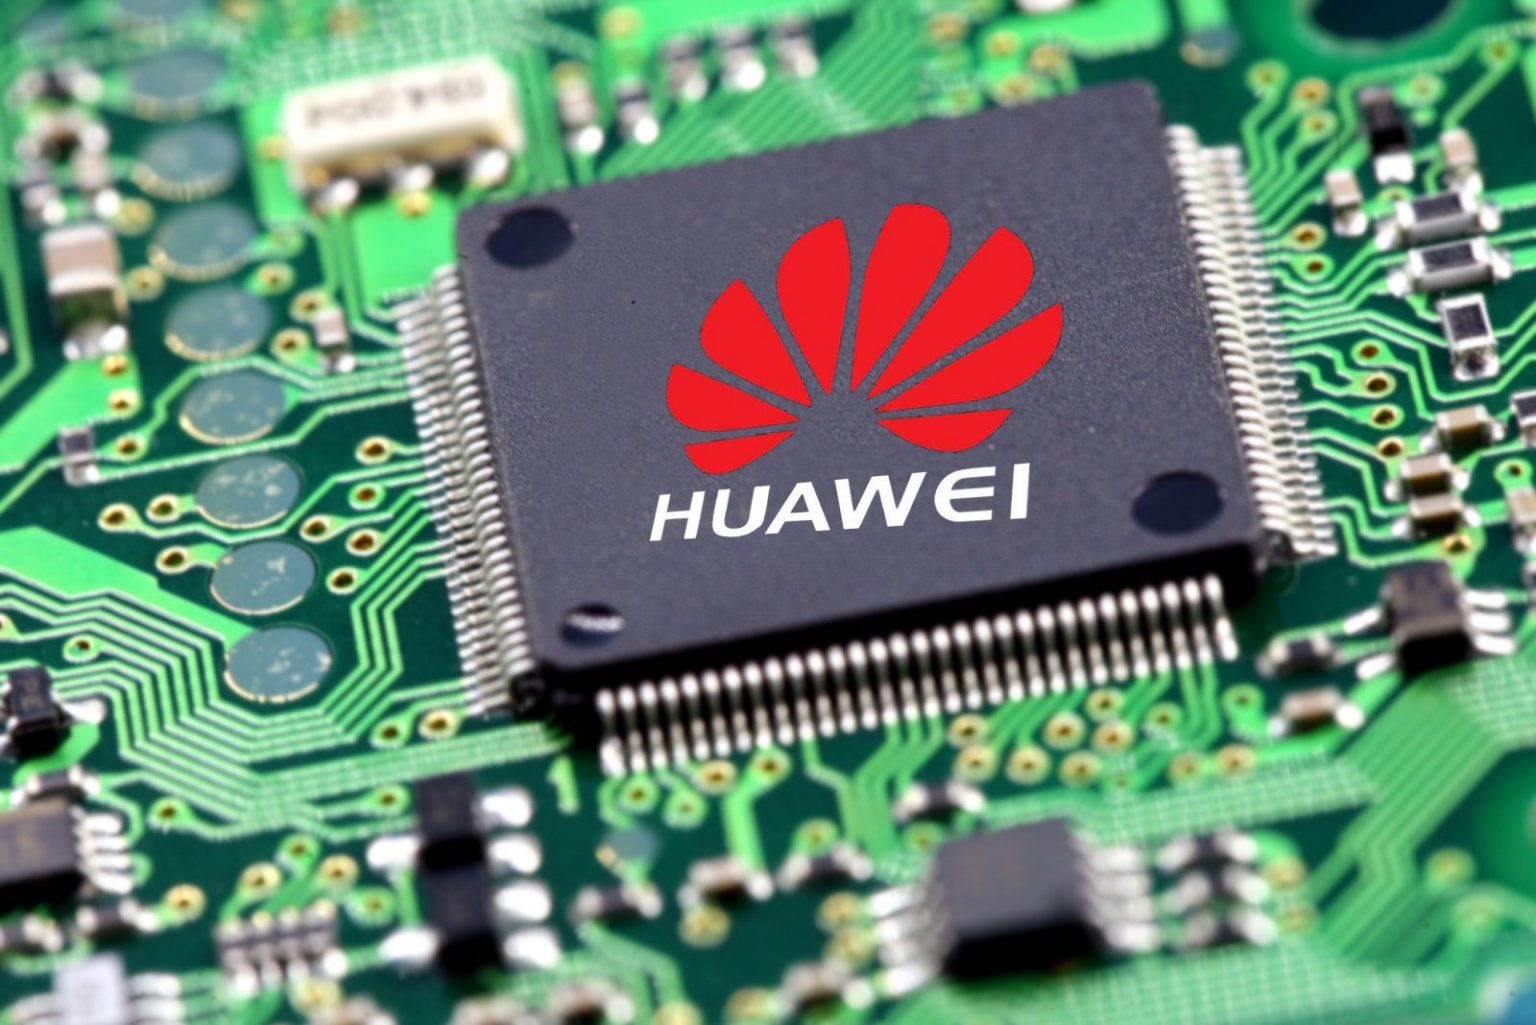 South Korea is the pivot in the Huawei wars